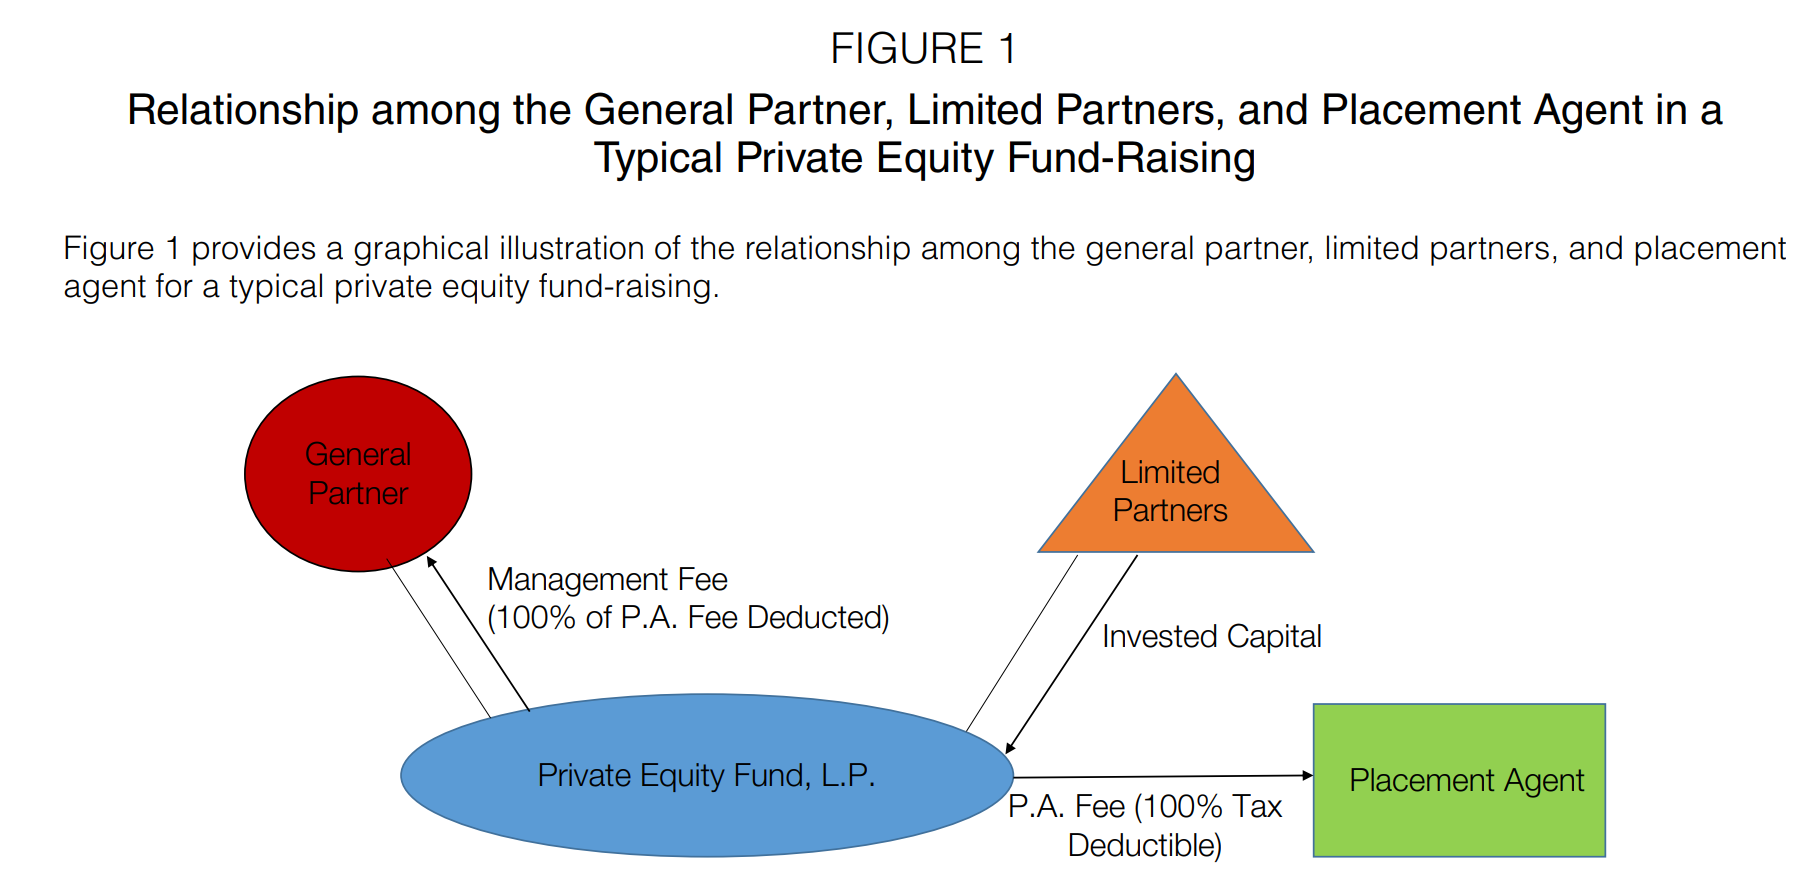 Private equity limited partnership structure chart